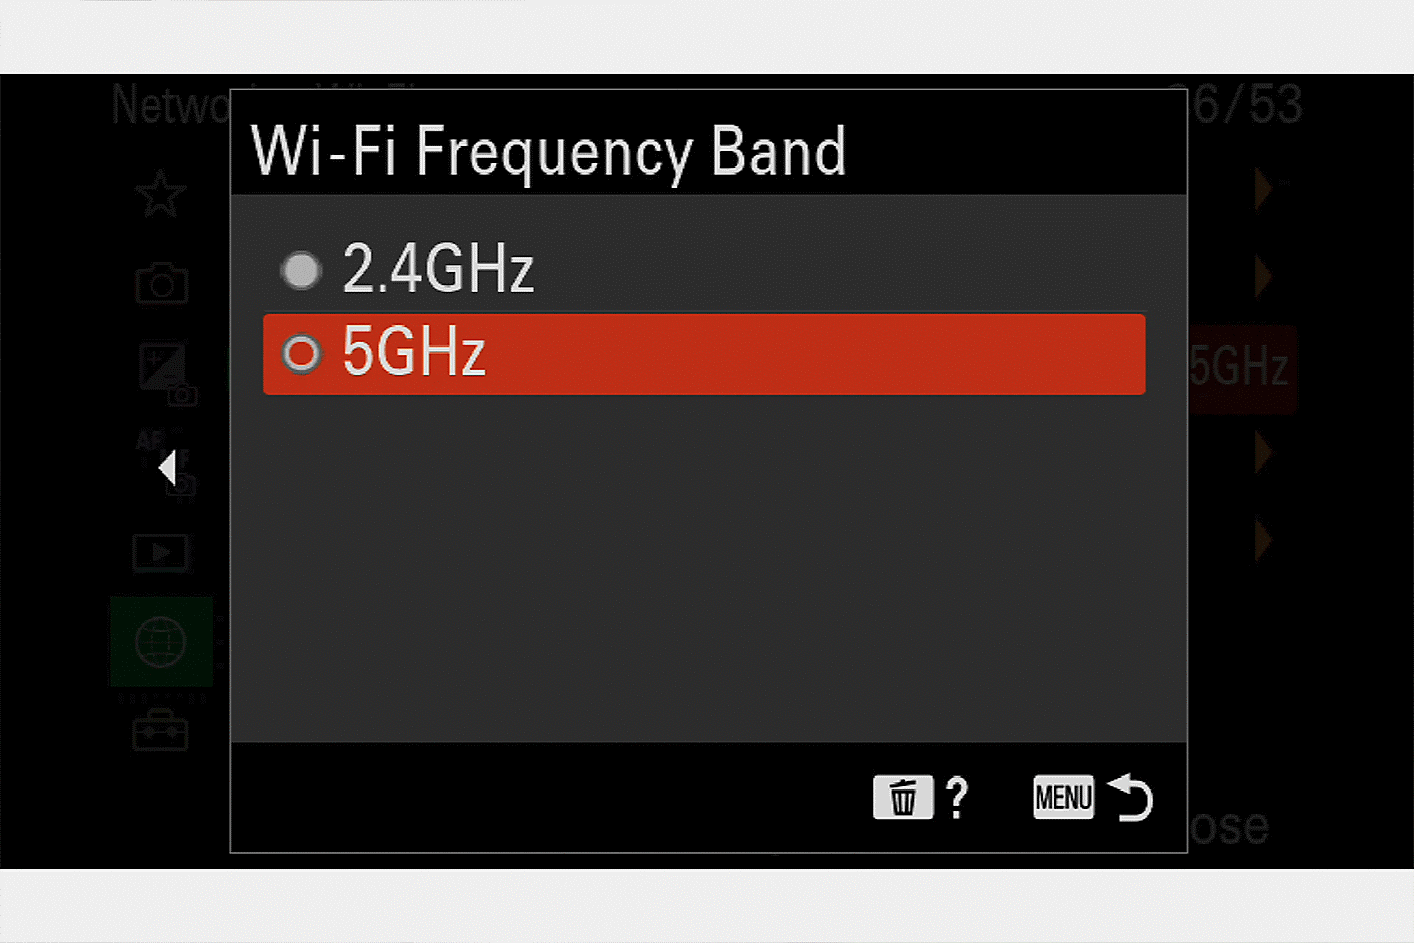 The menu display for selecting between 5GHz and 2.4GHz settings